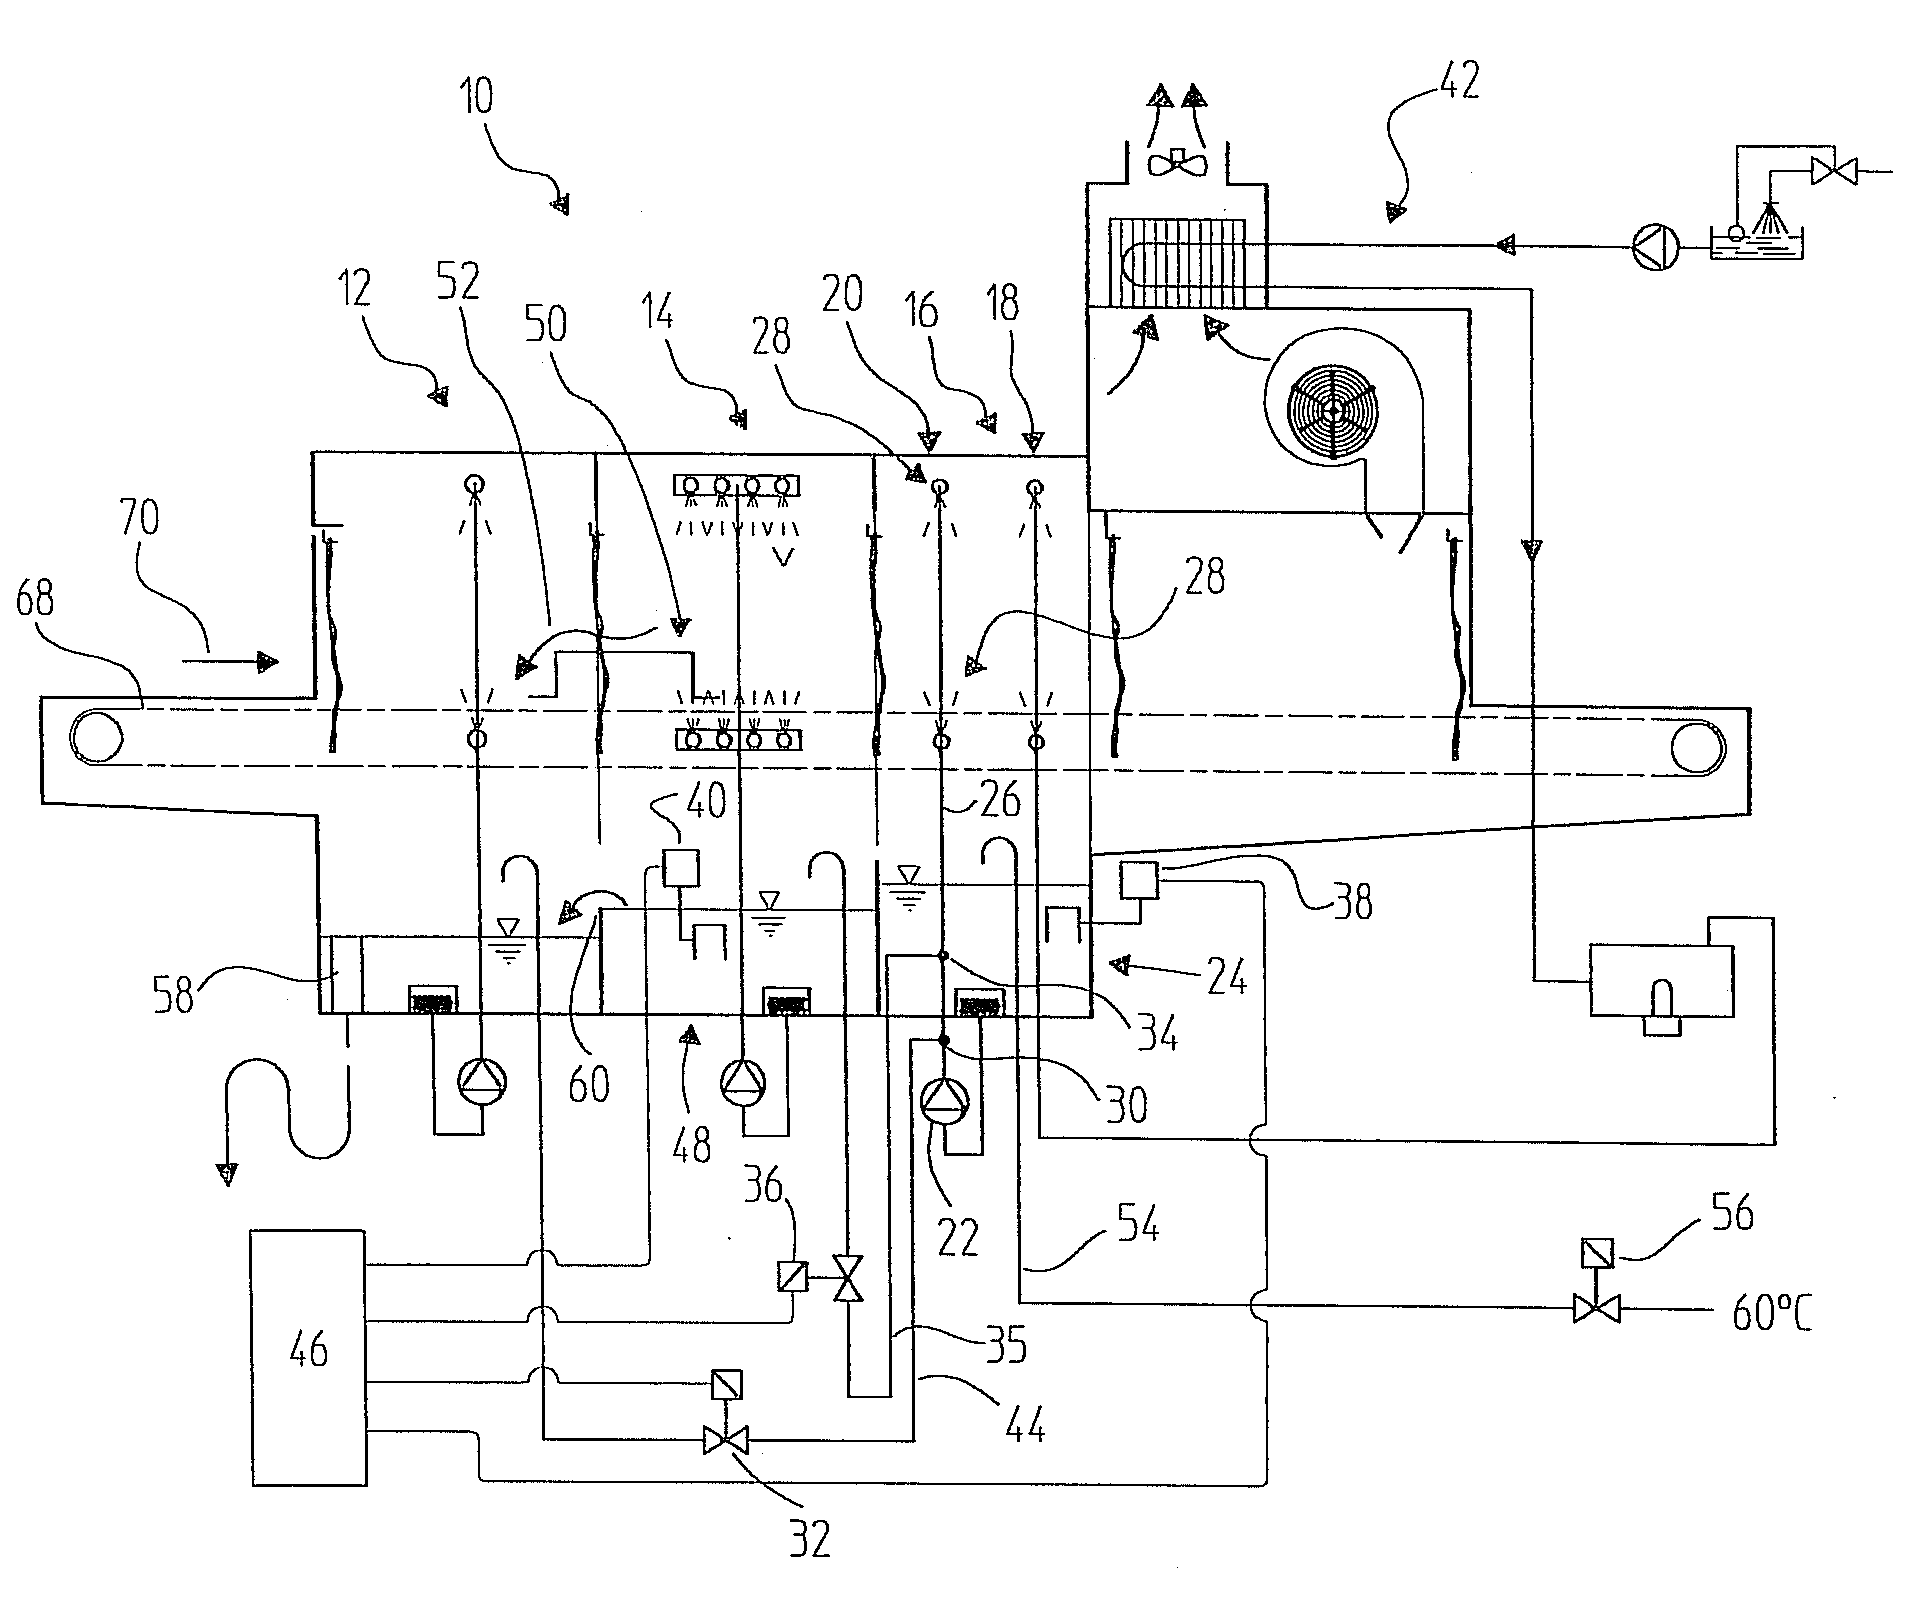 Method for operating a continuous-flow dishwashing machine